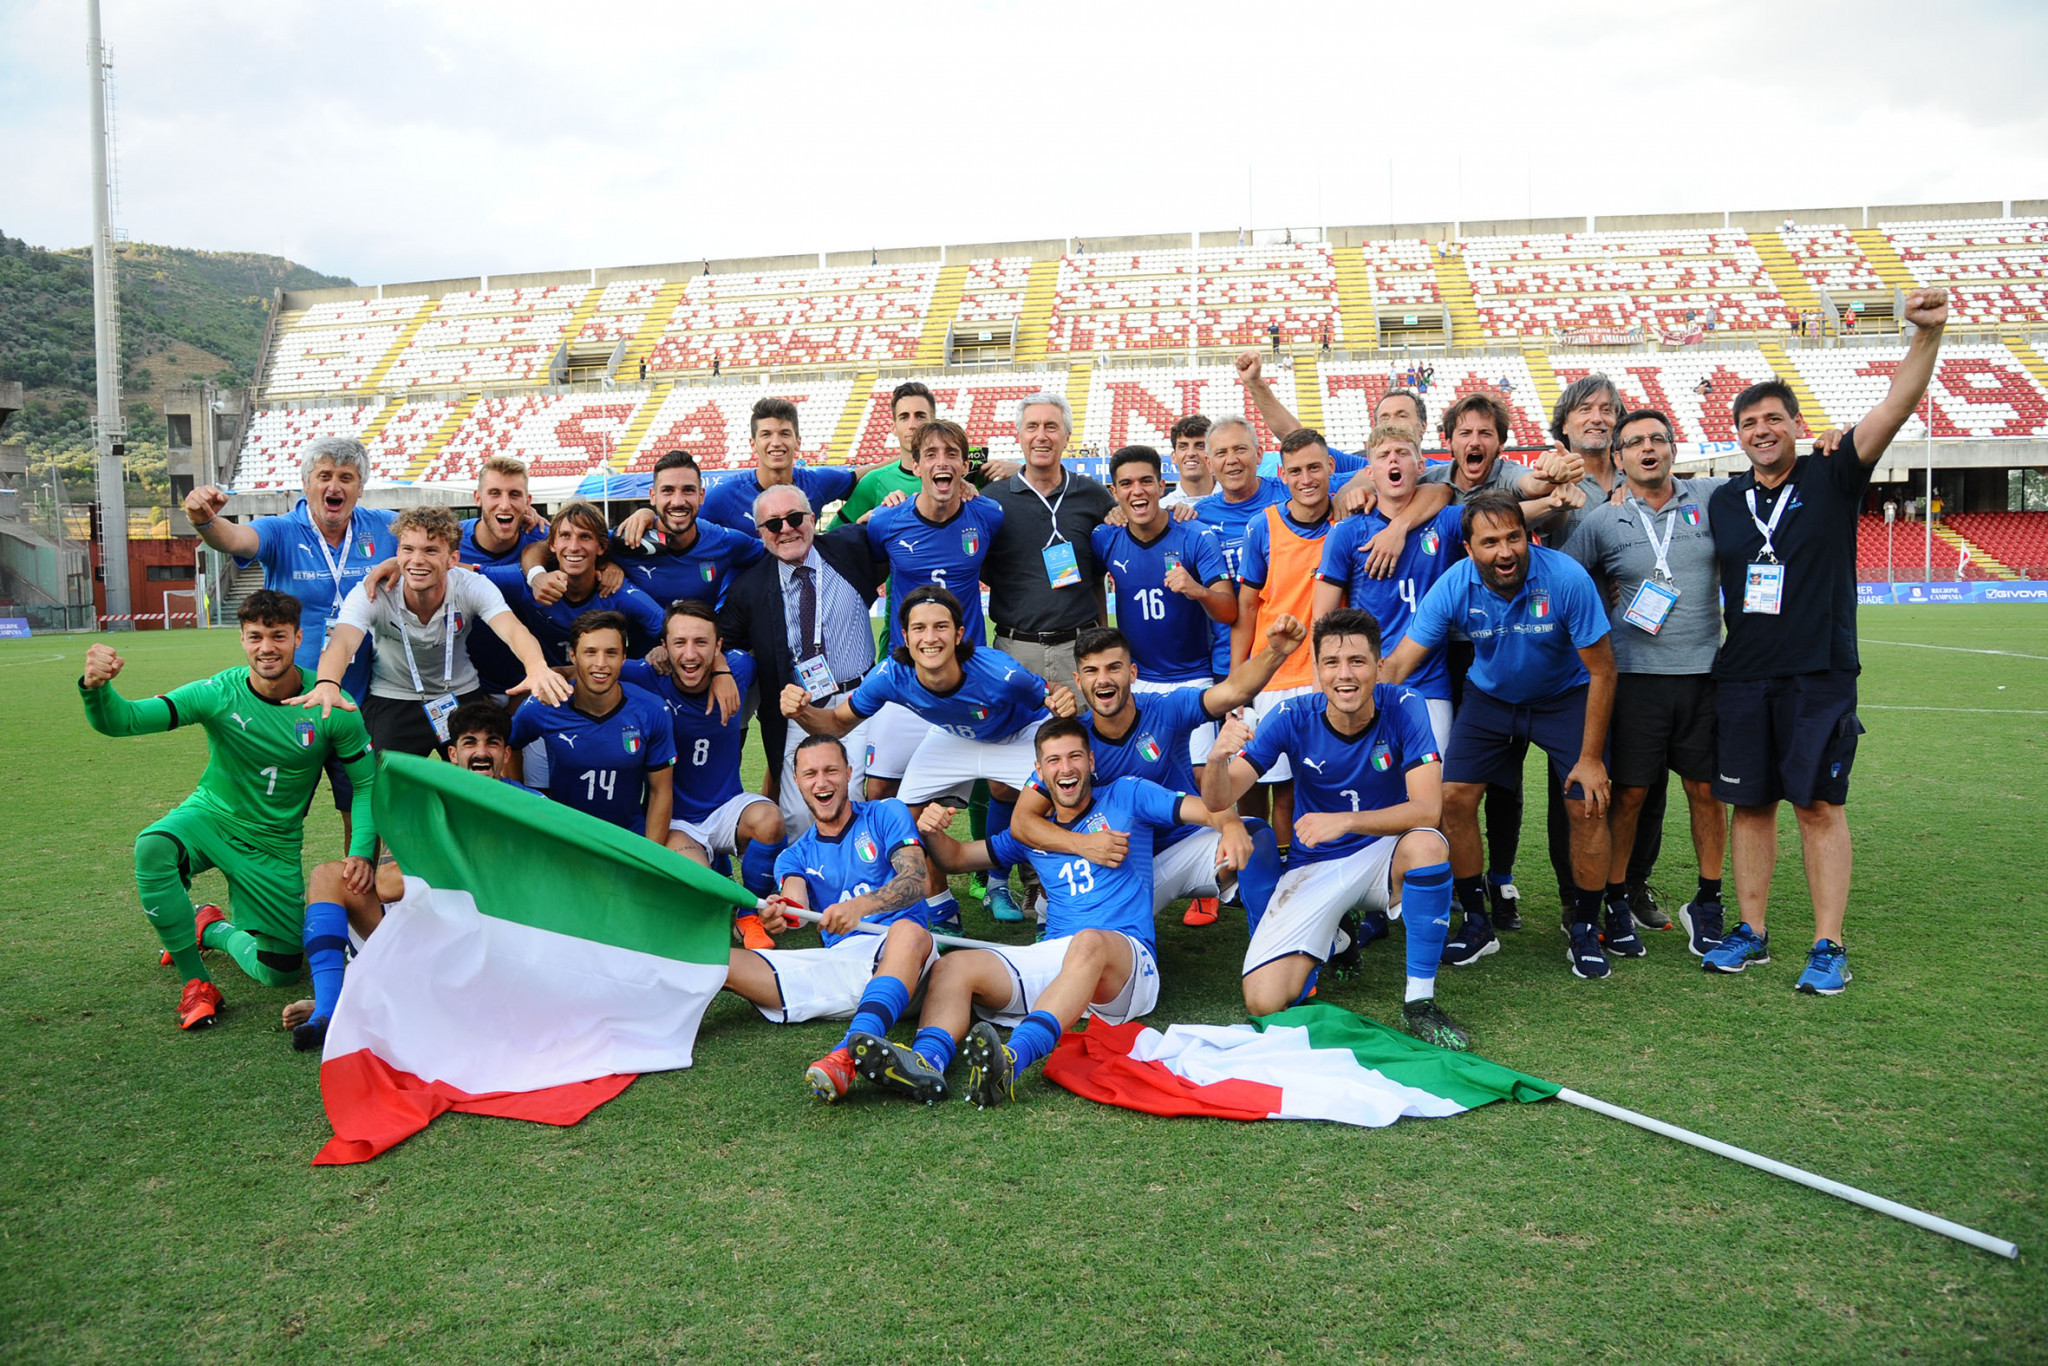 The Italians won the shootout to secure bronze in the men's football tournament ©Naples 2019